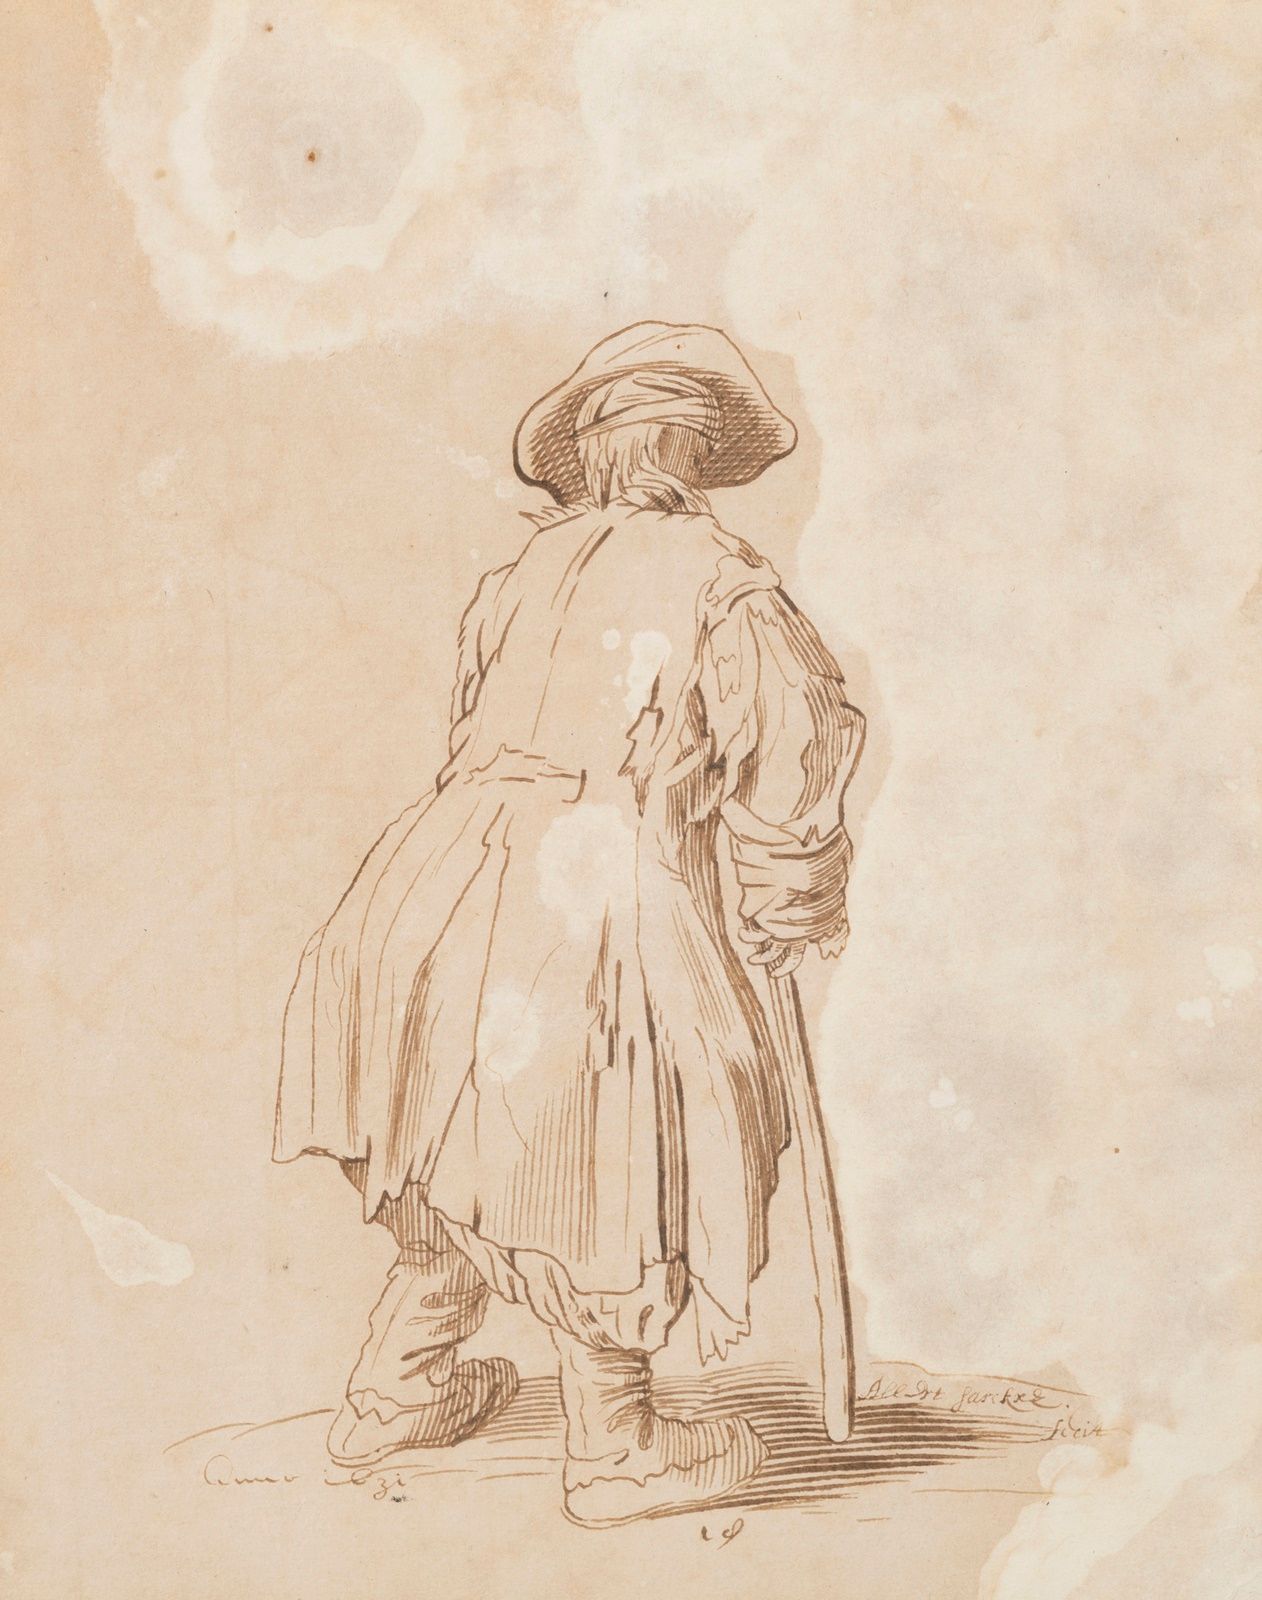 Null French school of the 19th century
Portrait of a beggar 
Ink
19 x 15 cm.